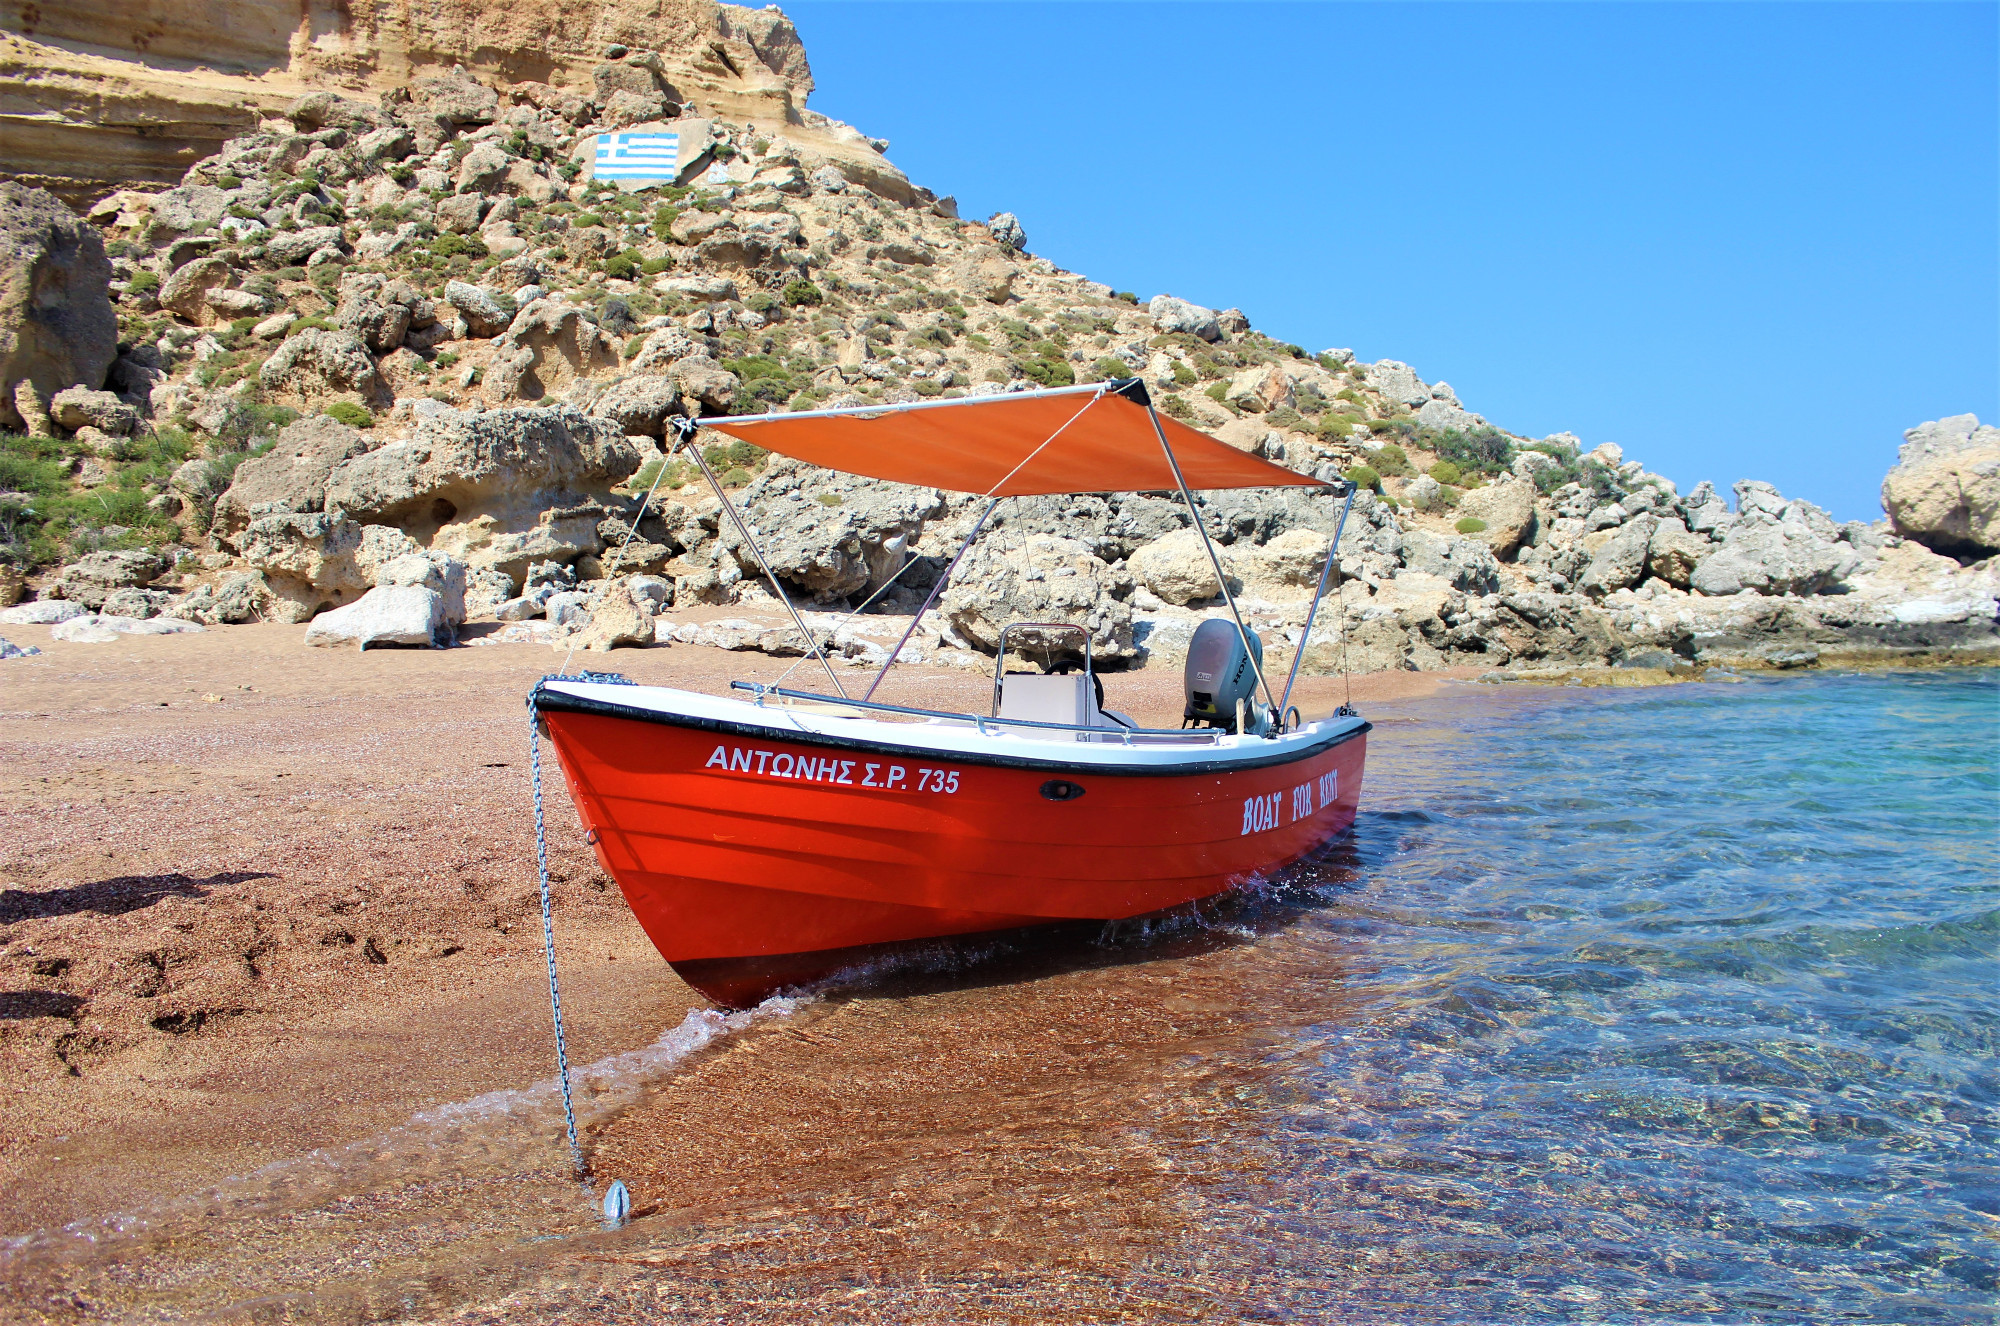 Boat on Red Sand Beach